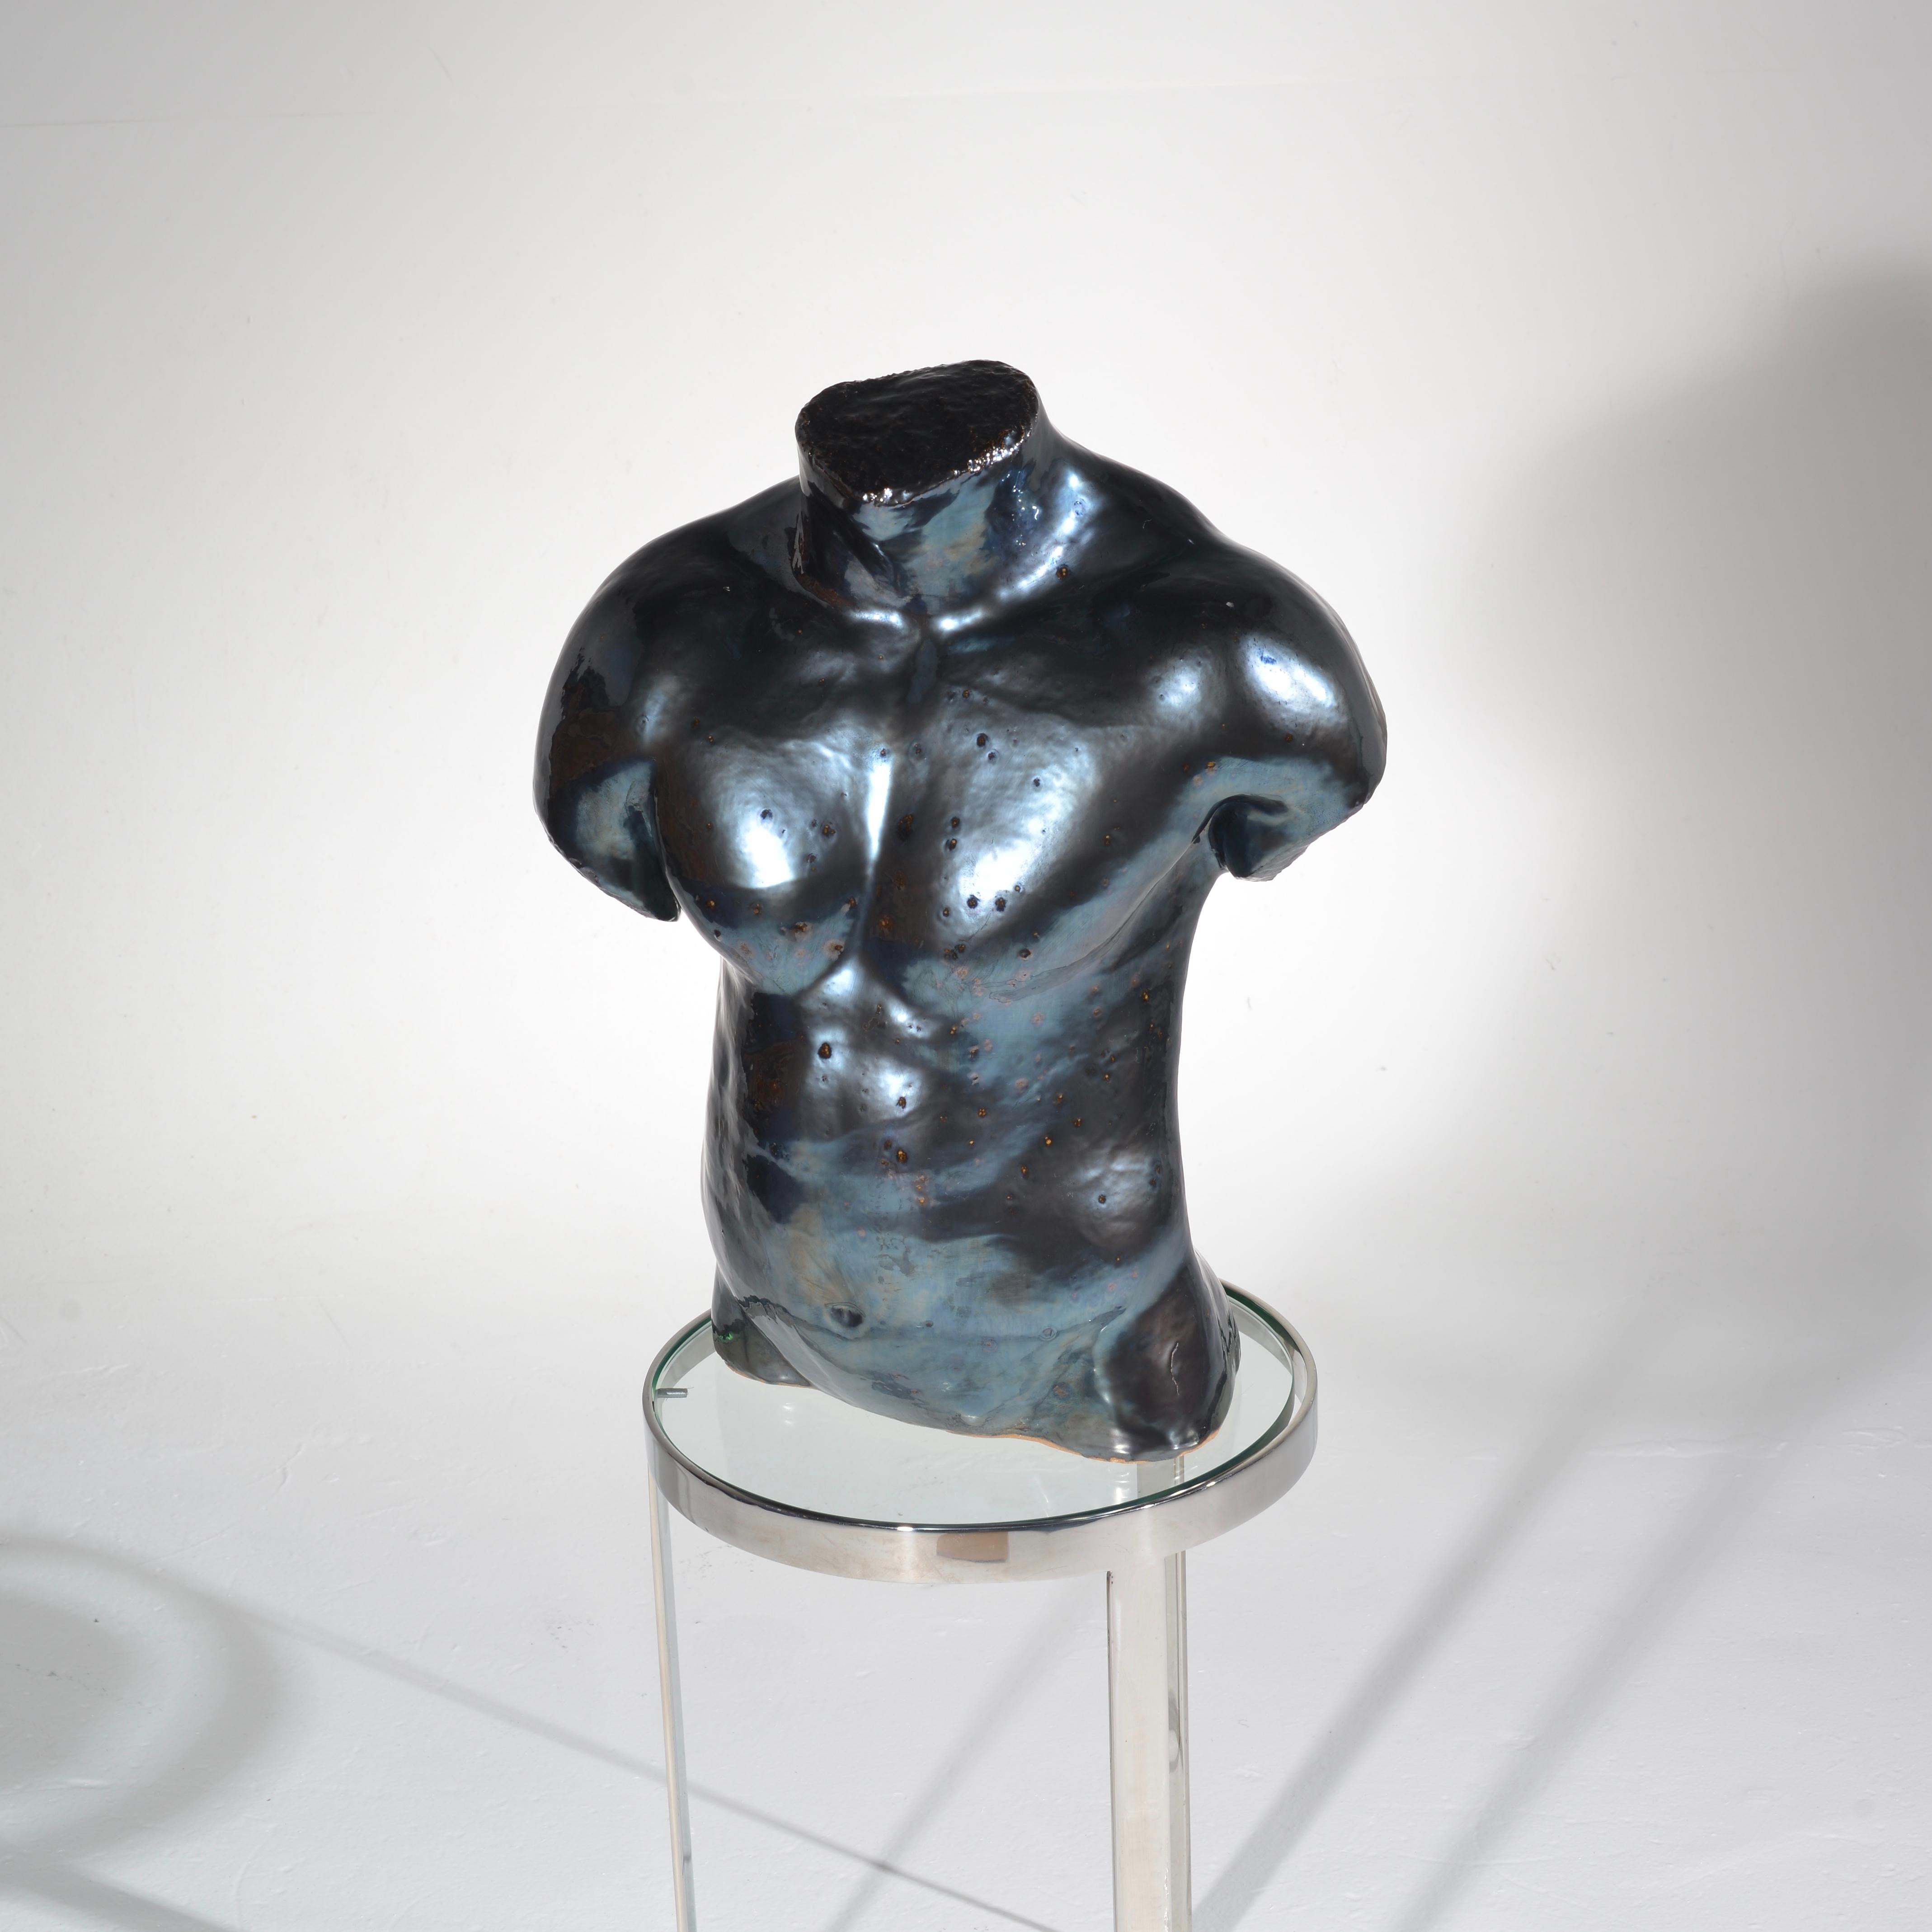 Life Size Ceramic Male Bust by Artist S Porter, circa 1985 (Moderne)